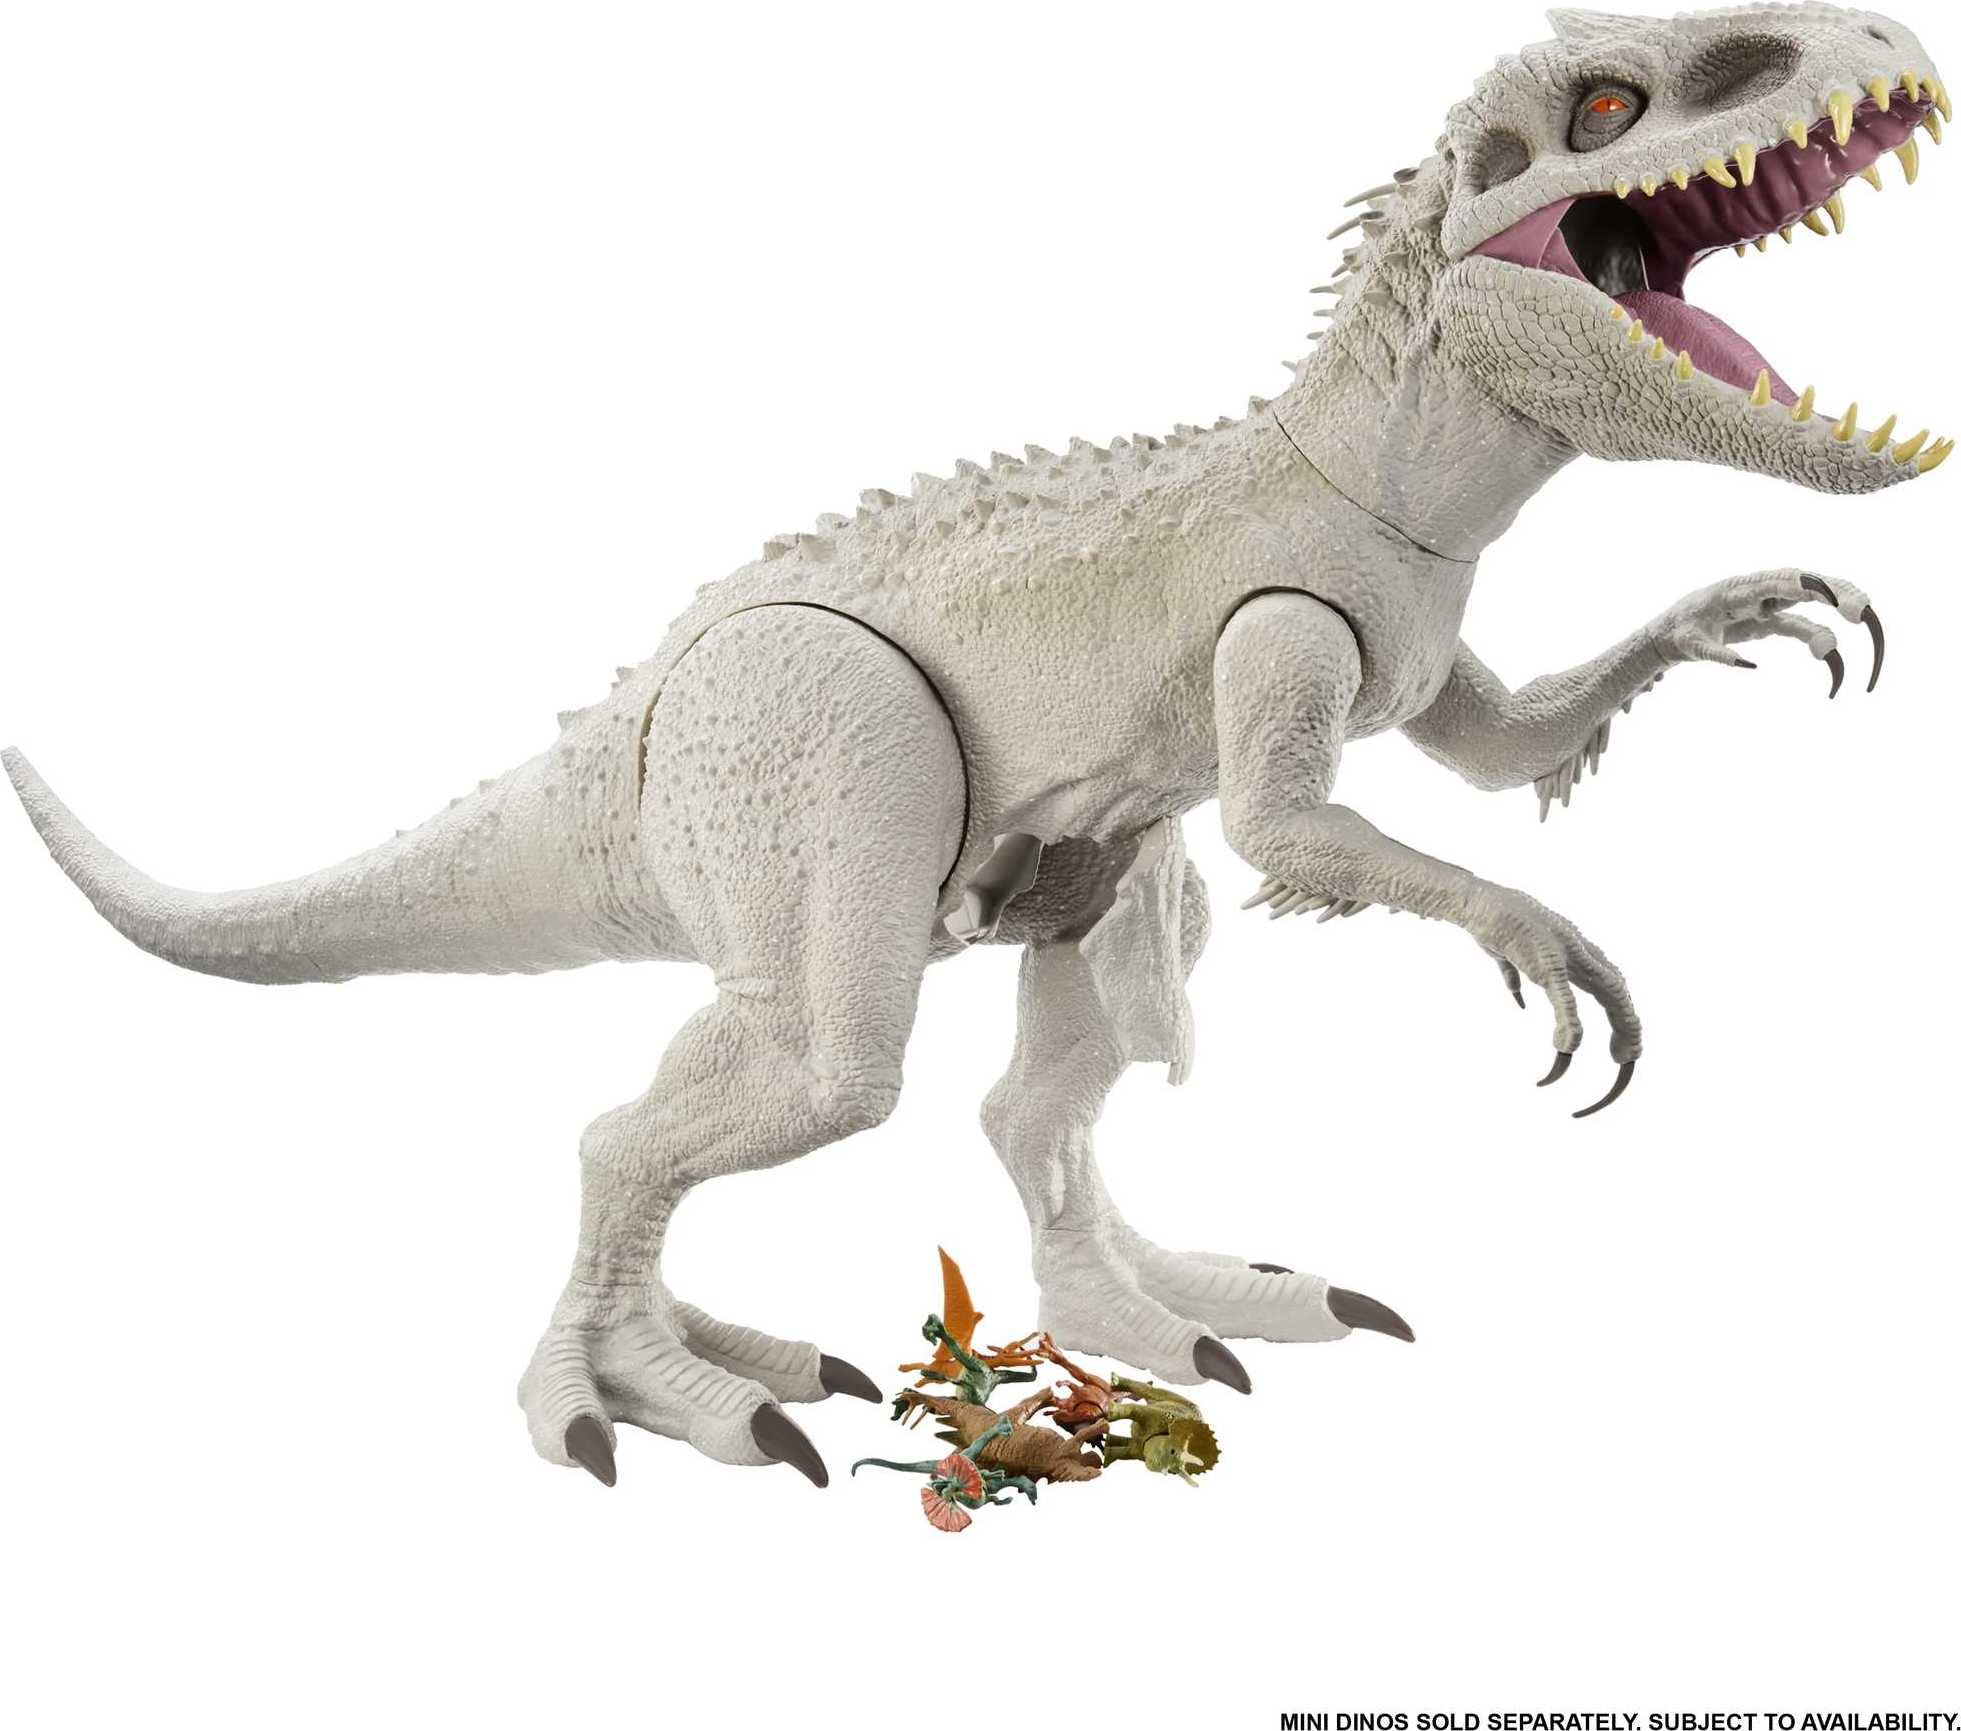 Jurassic World Toys Camp Cretaceous Super Colossal Indominus Rex Dinosaur Toy, Action Figure At 3.5 Feet Long with Eating Feature, Gifts for Kids